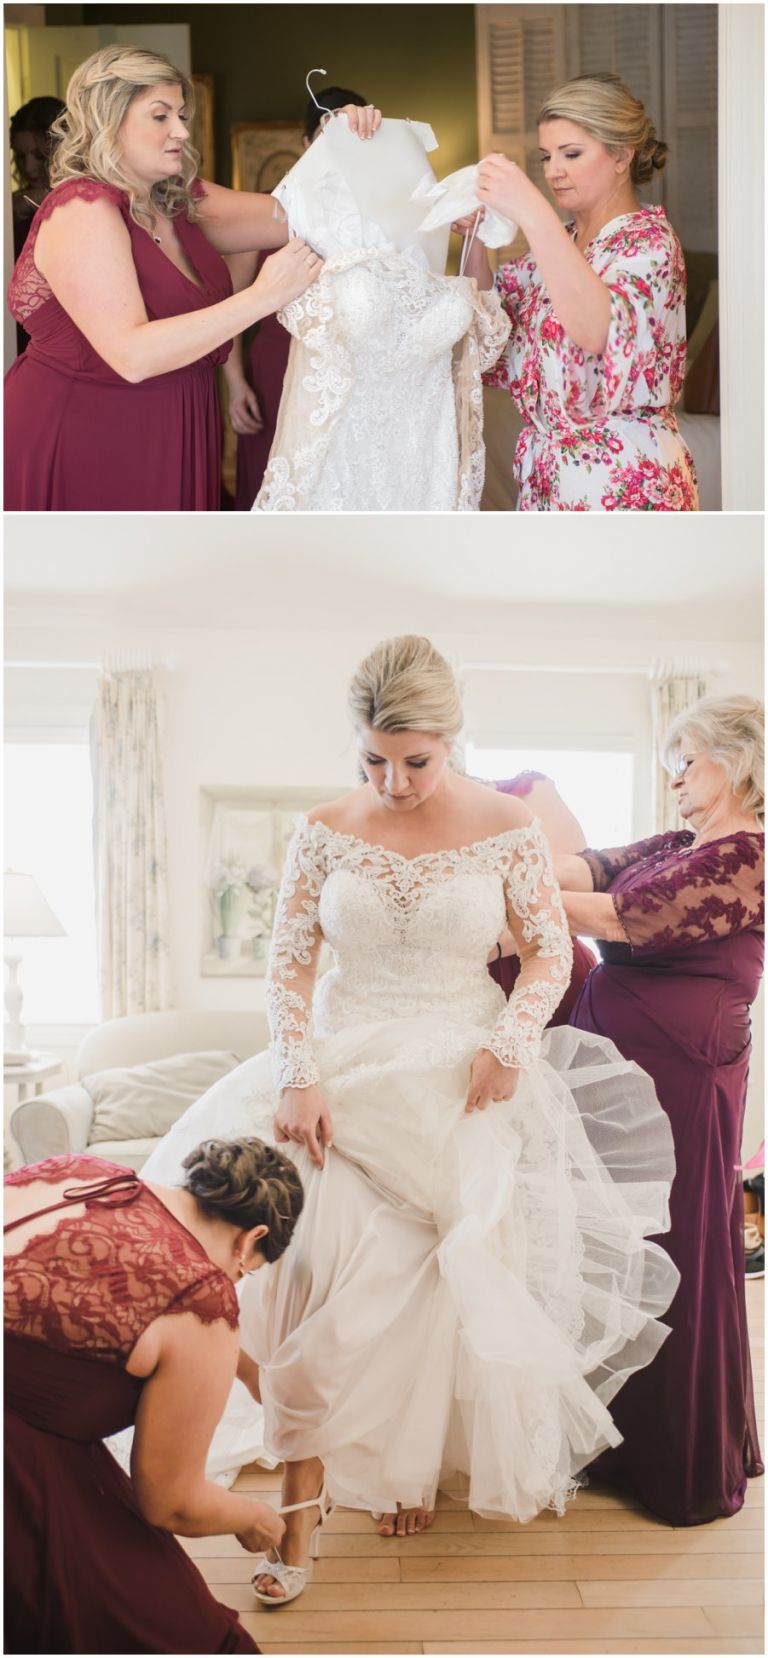 Bride dresses in her gown and shoes at The Oaks in St. Michaels, MD by Melissa Grimes-Guy Photography